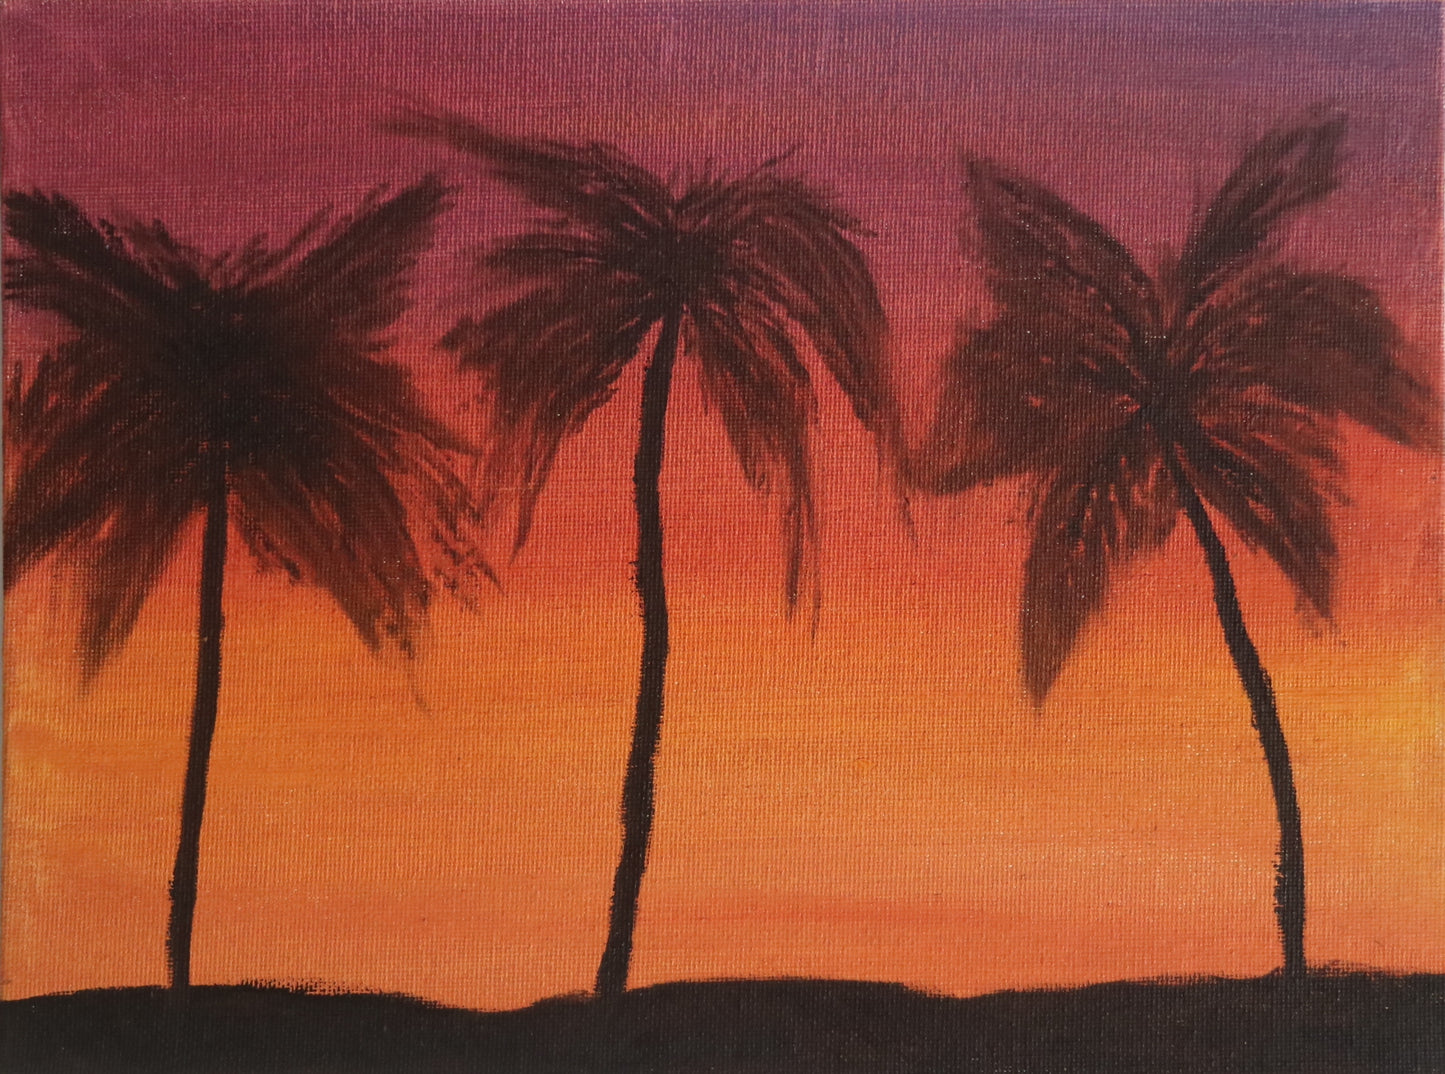 Oil painting of orange and purple colors in background with silhouette of three palm trees in the foreground.